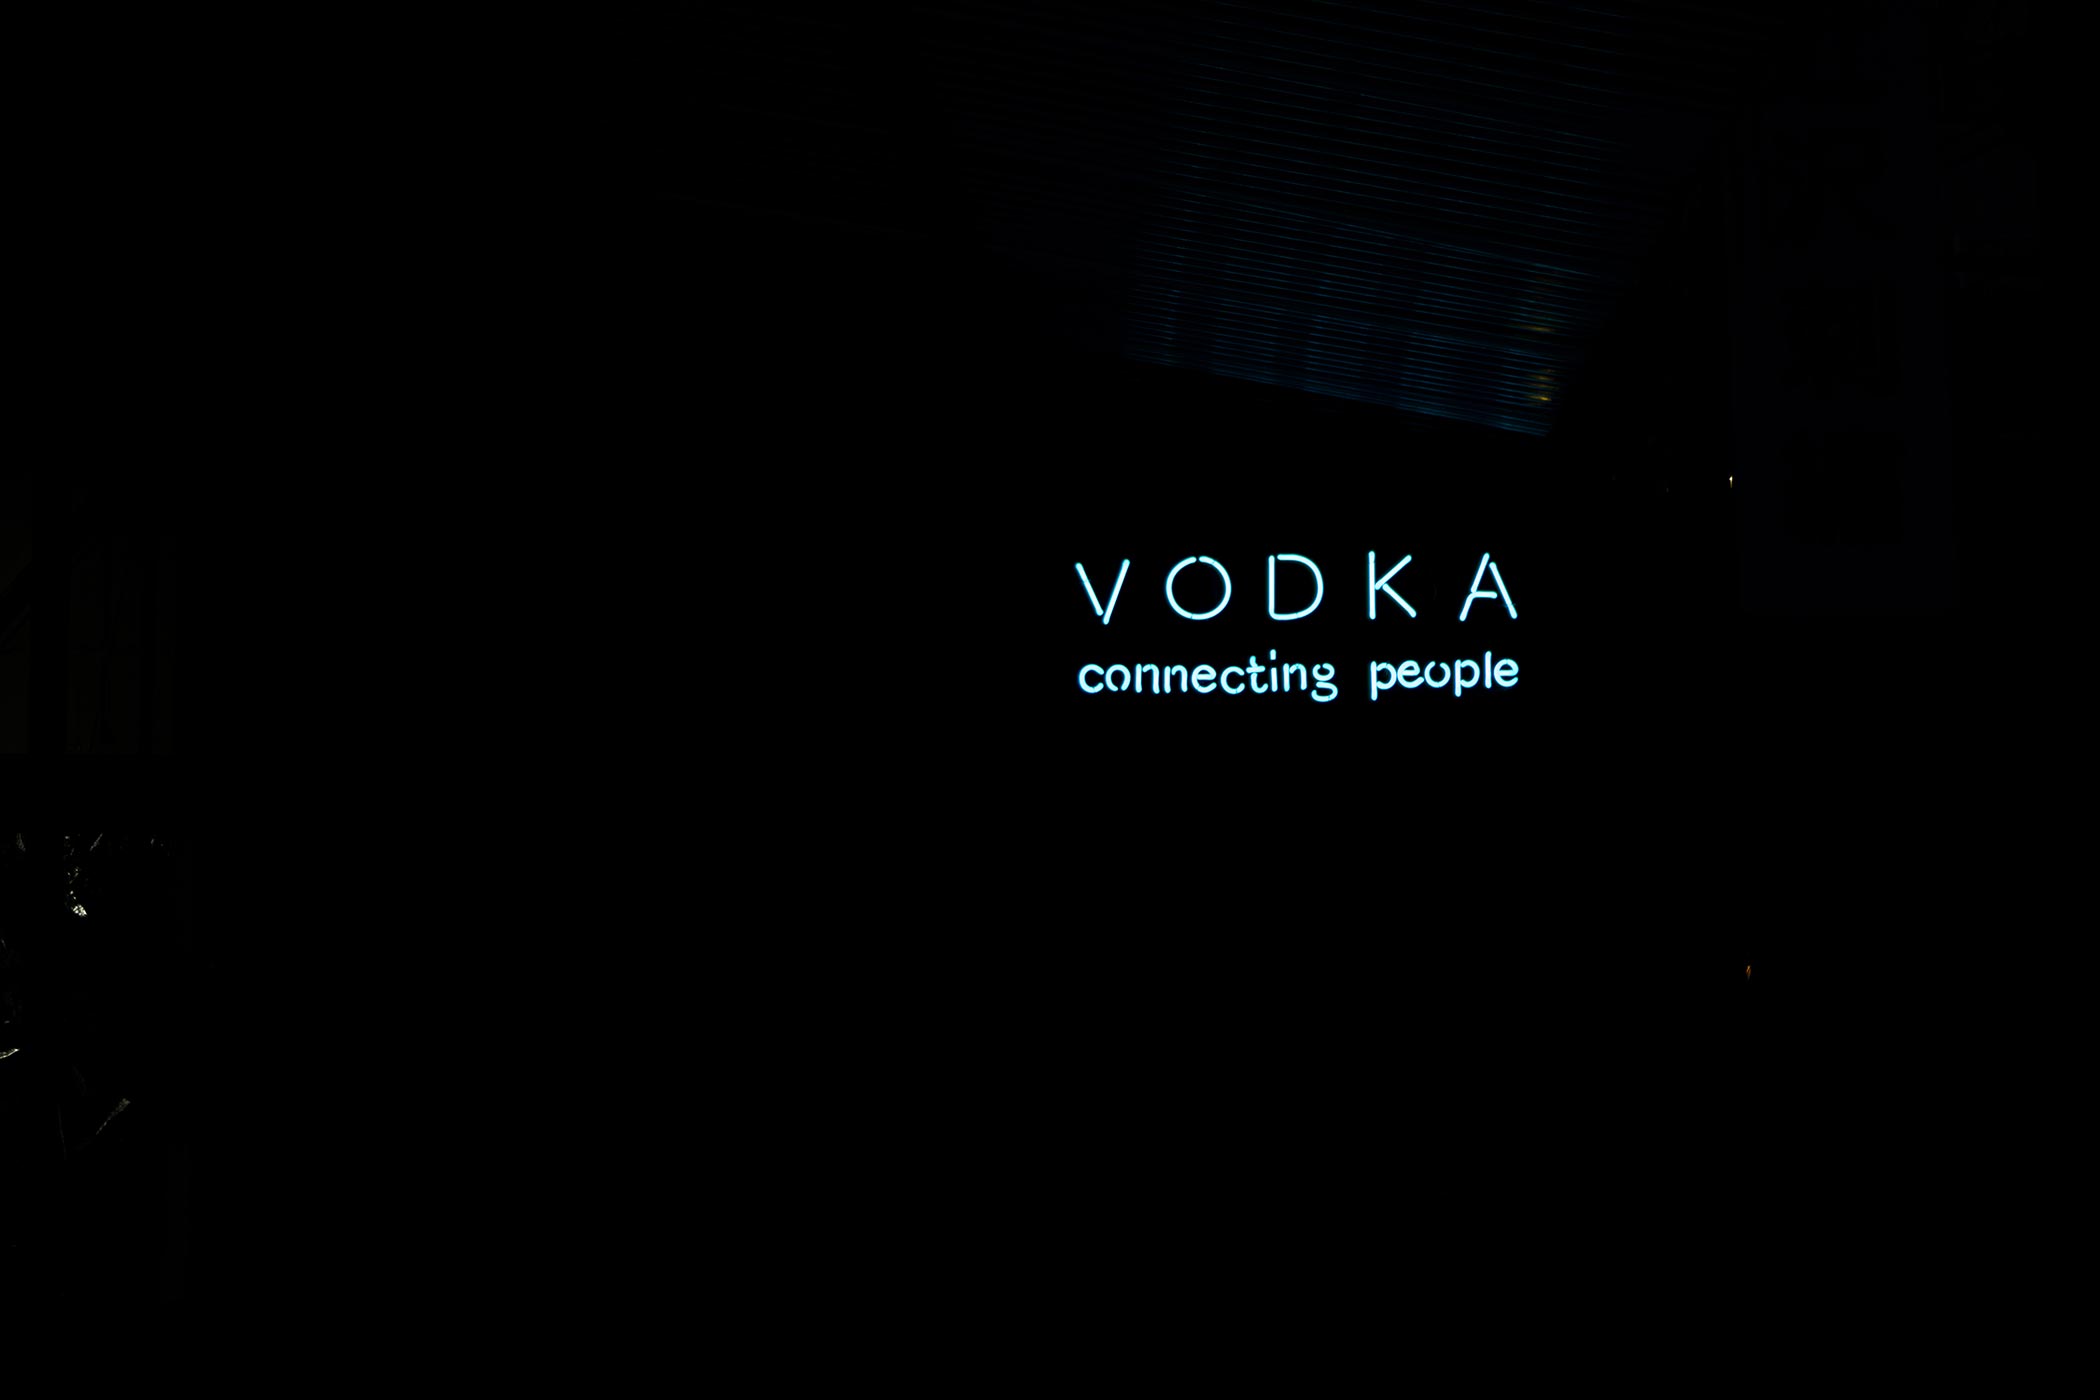 VODKA connecting people